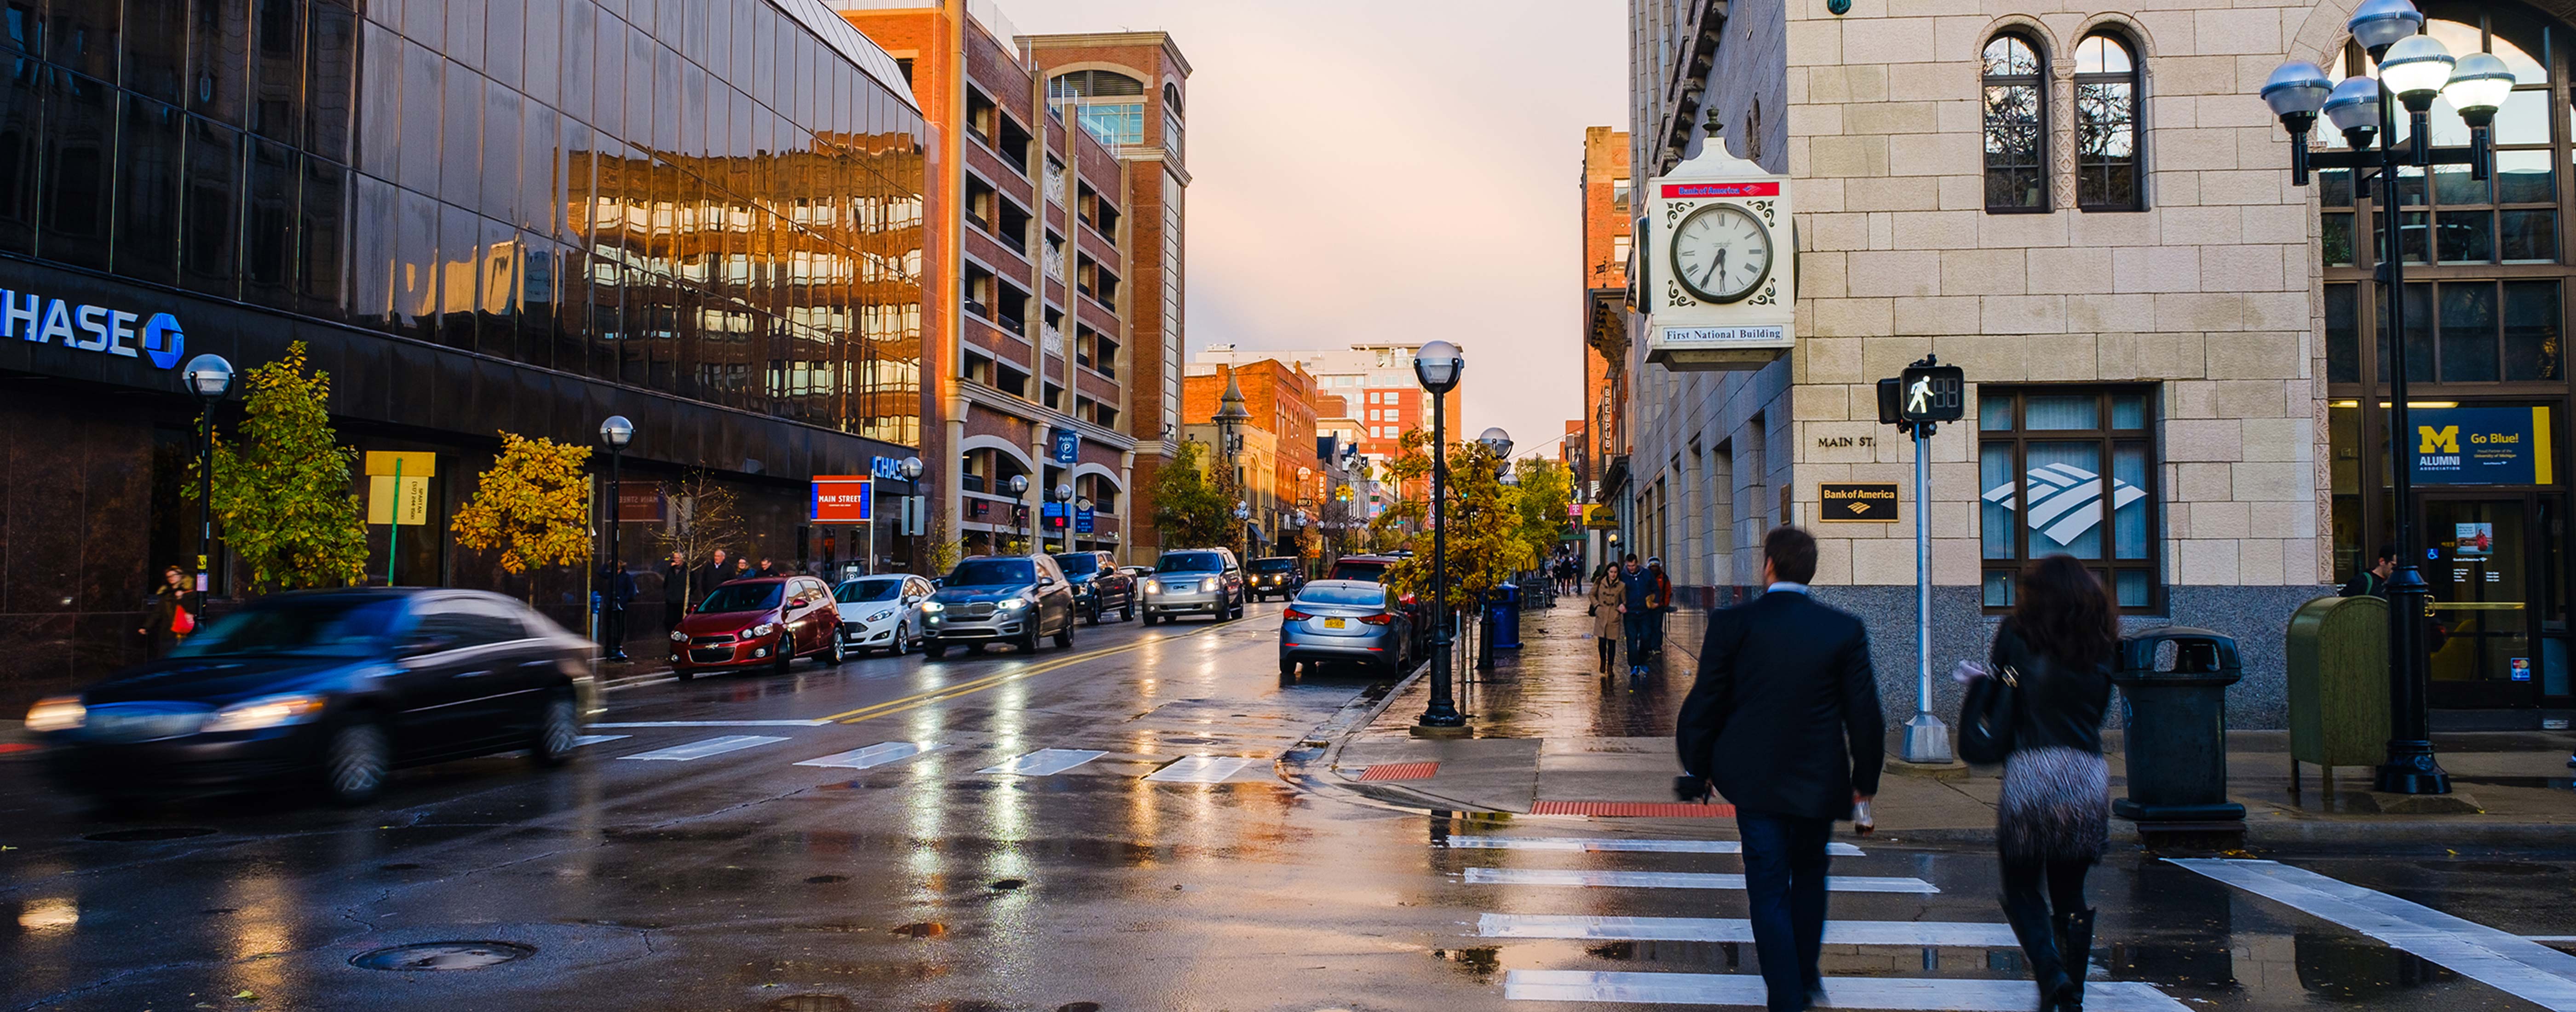 The City of Ann Arbor, Michigan's downtown at dusk.